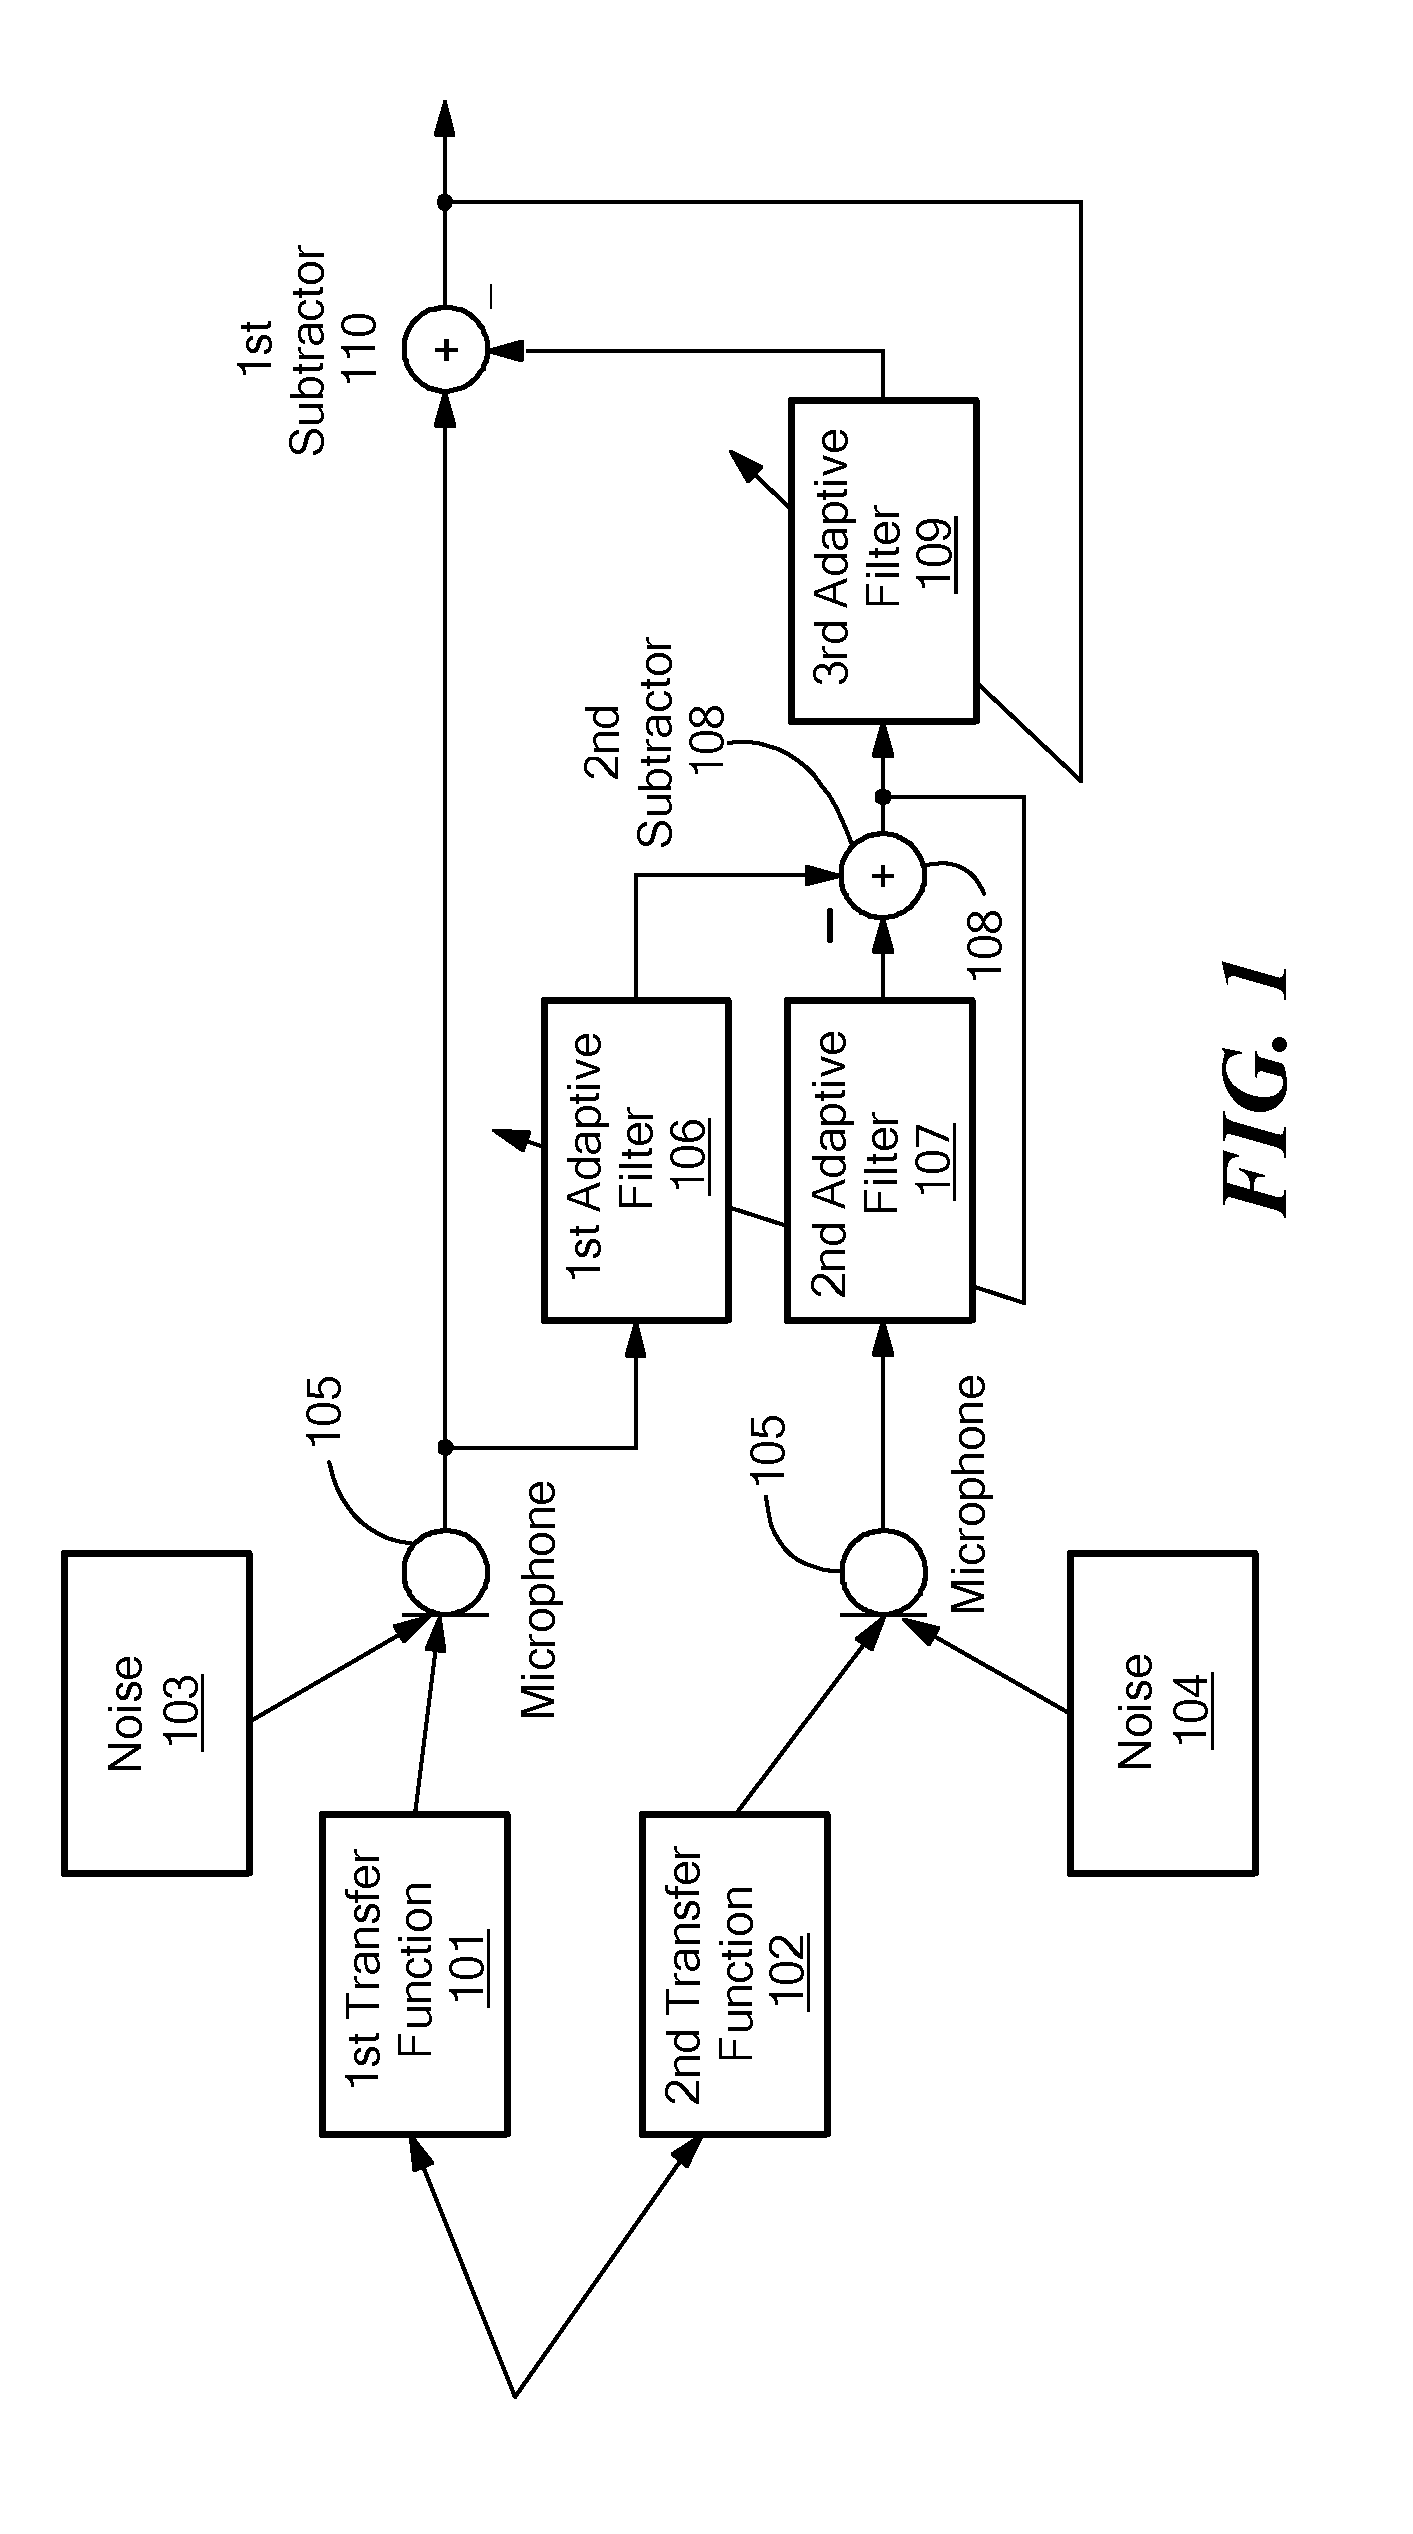 Method for Determining a Noise Reference Signal for Noise Compensation and/or Noise Reduction